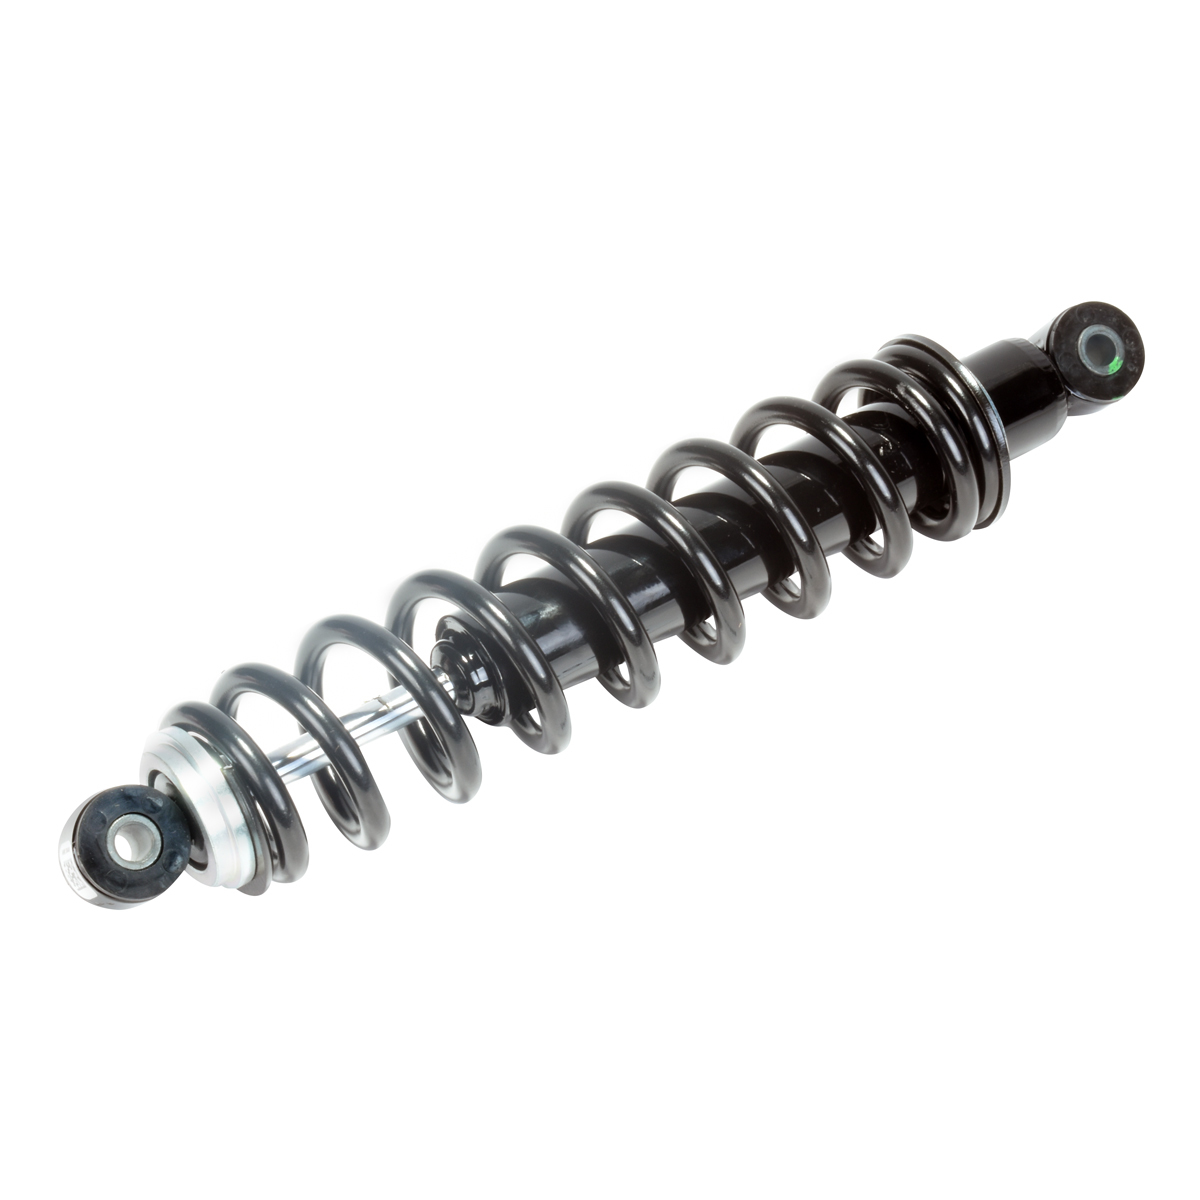 Shock Absorber for TH, TS, TX, 4x2 and 6x4 Gators